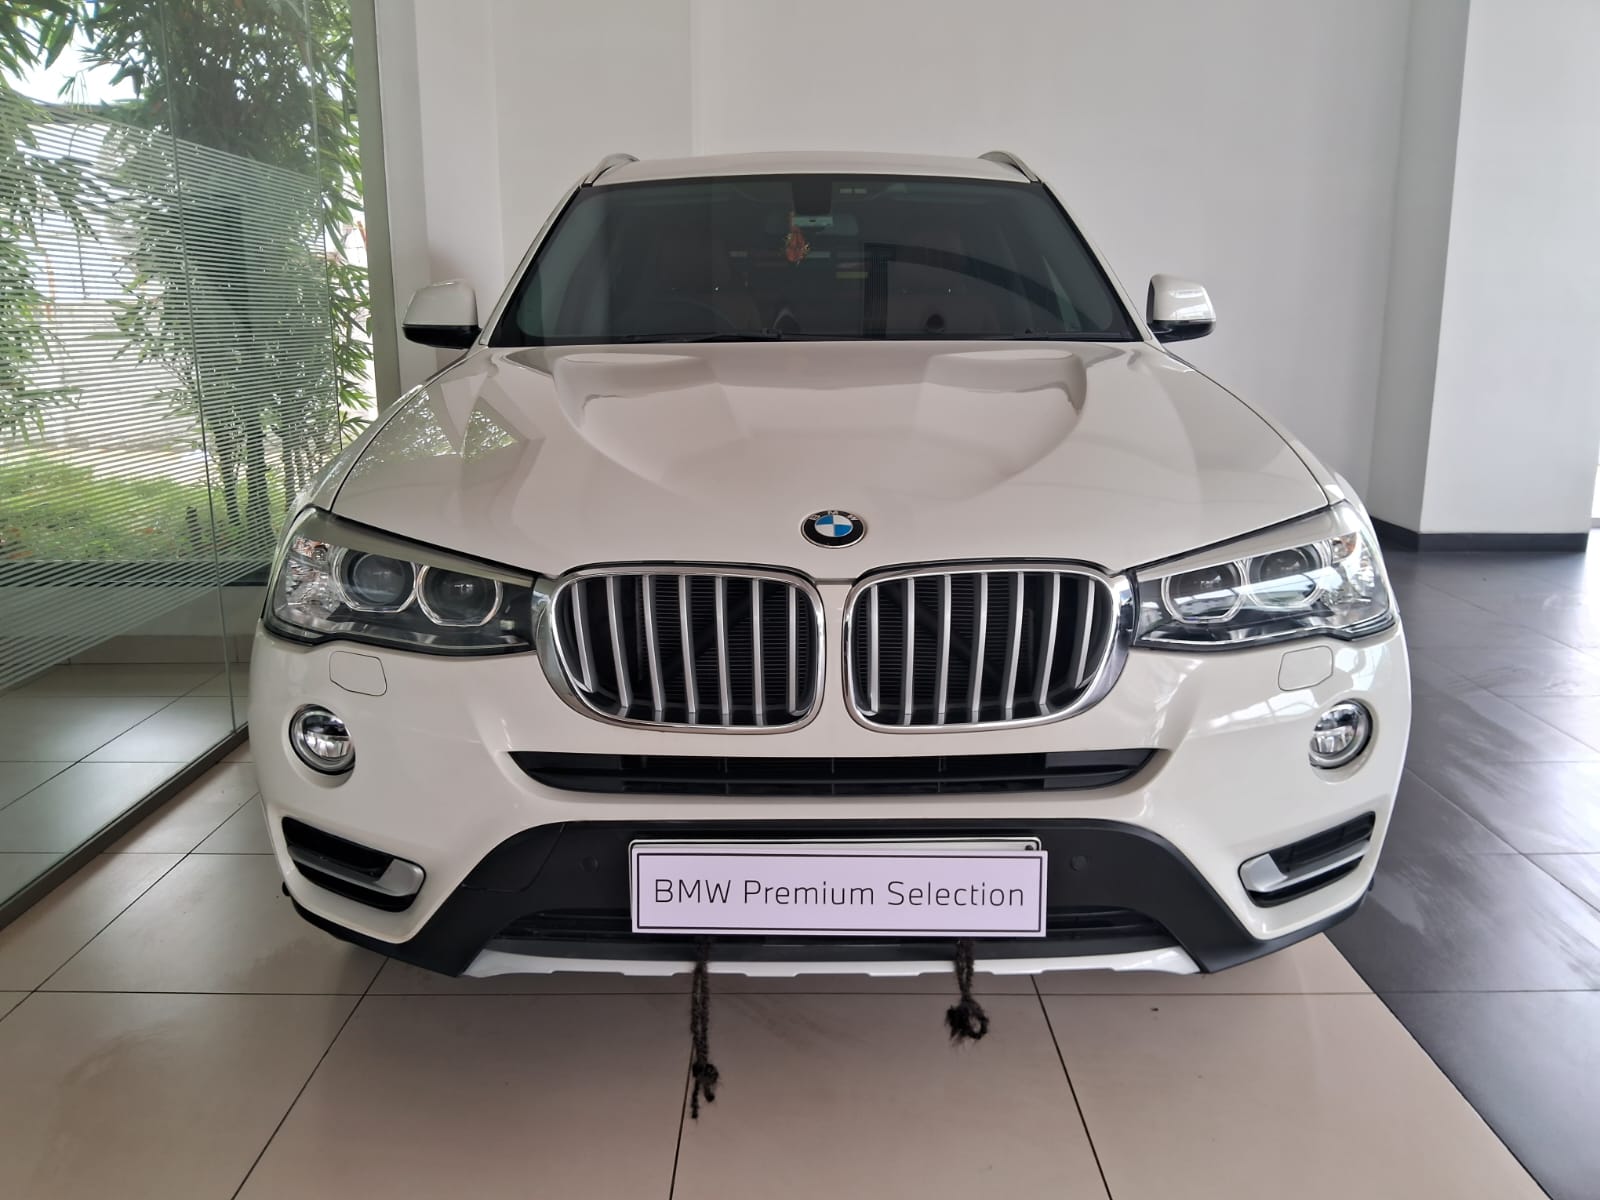 BMW X3 20d - 2016 model - 83781 fro